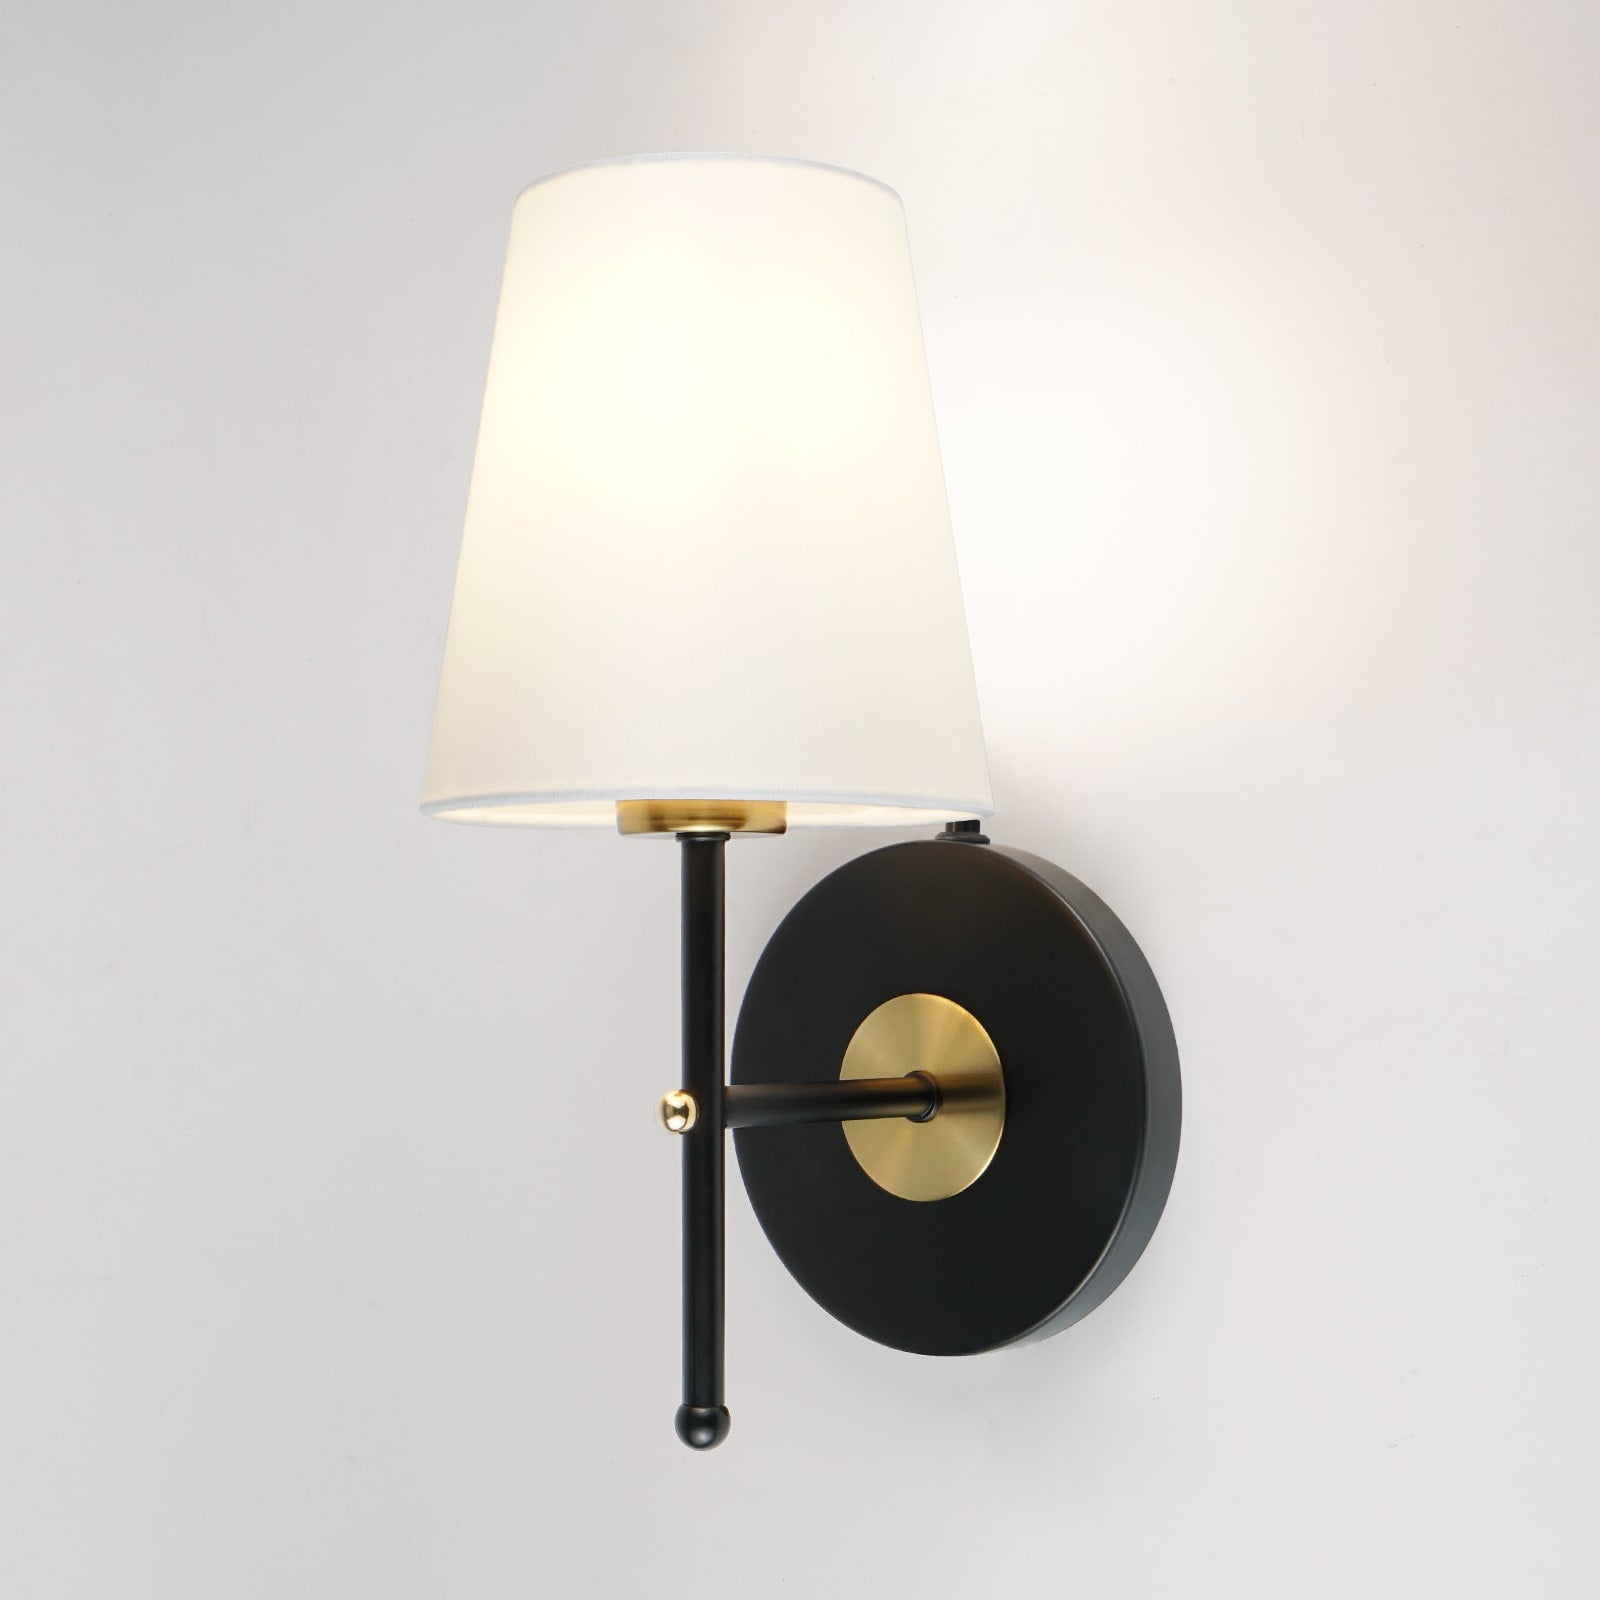 C01 Battery Operated Wall Sconces Lamp with Fabric Shade